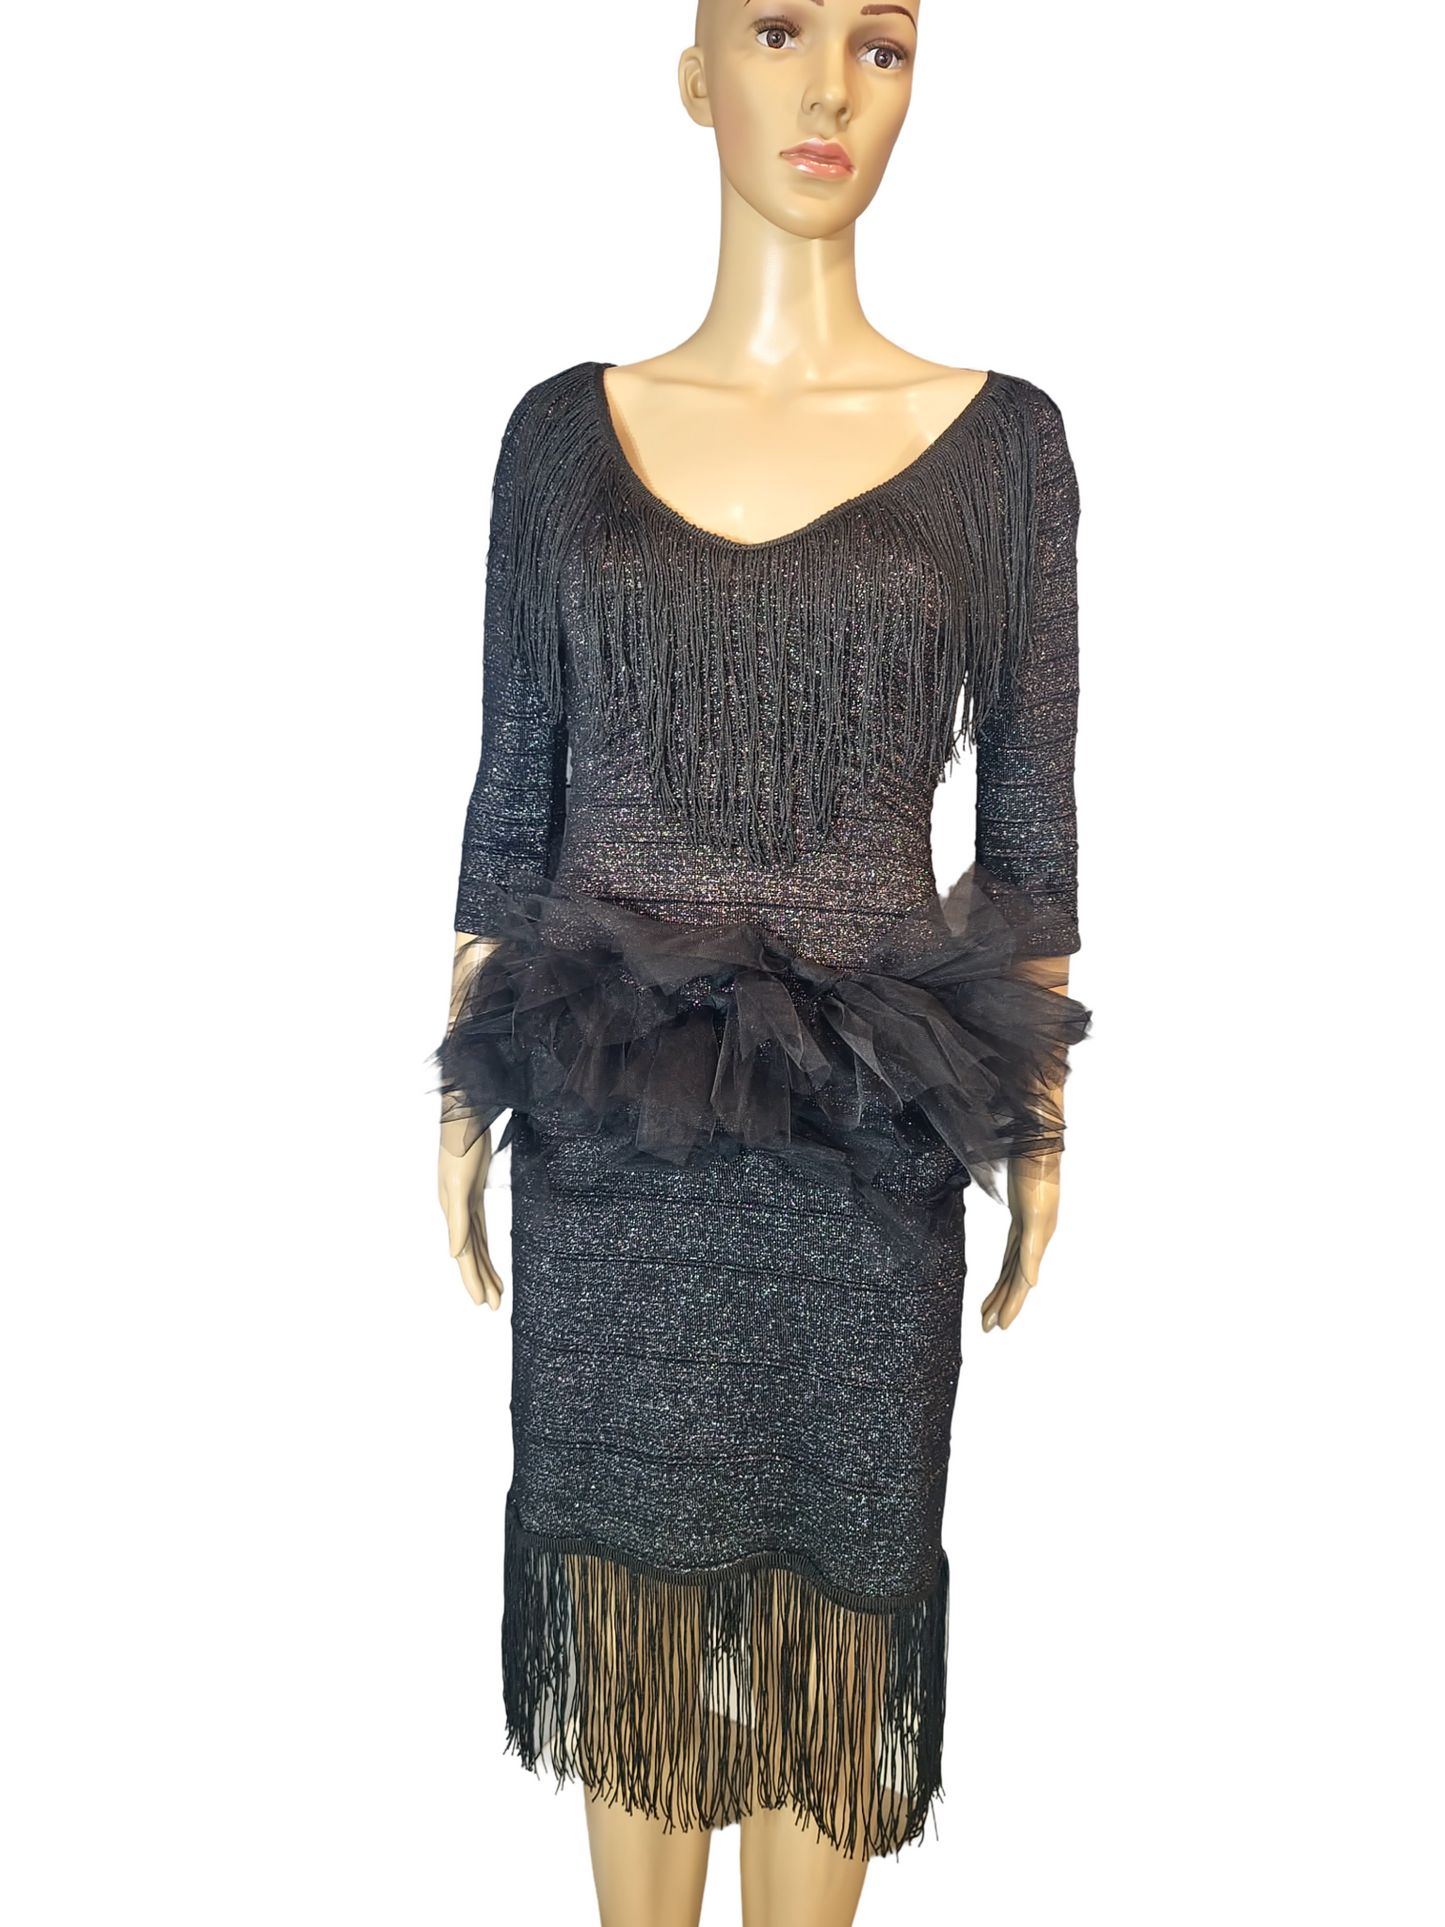 Rumba Dress.  All fashion created yesterday has a bigger value today. We love our garments because we use what exists, and the workmanship is exquisite.  Drip, Drip, Drip of elegance and style. Fringe trim is soft and perfect for movements,  dancing...